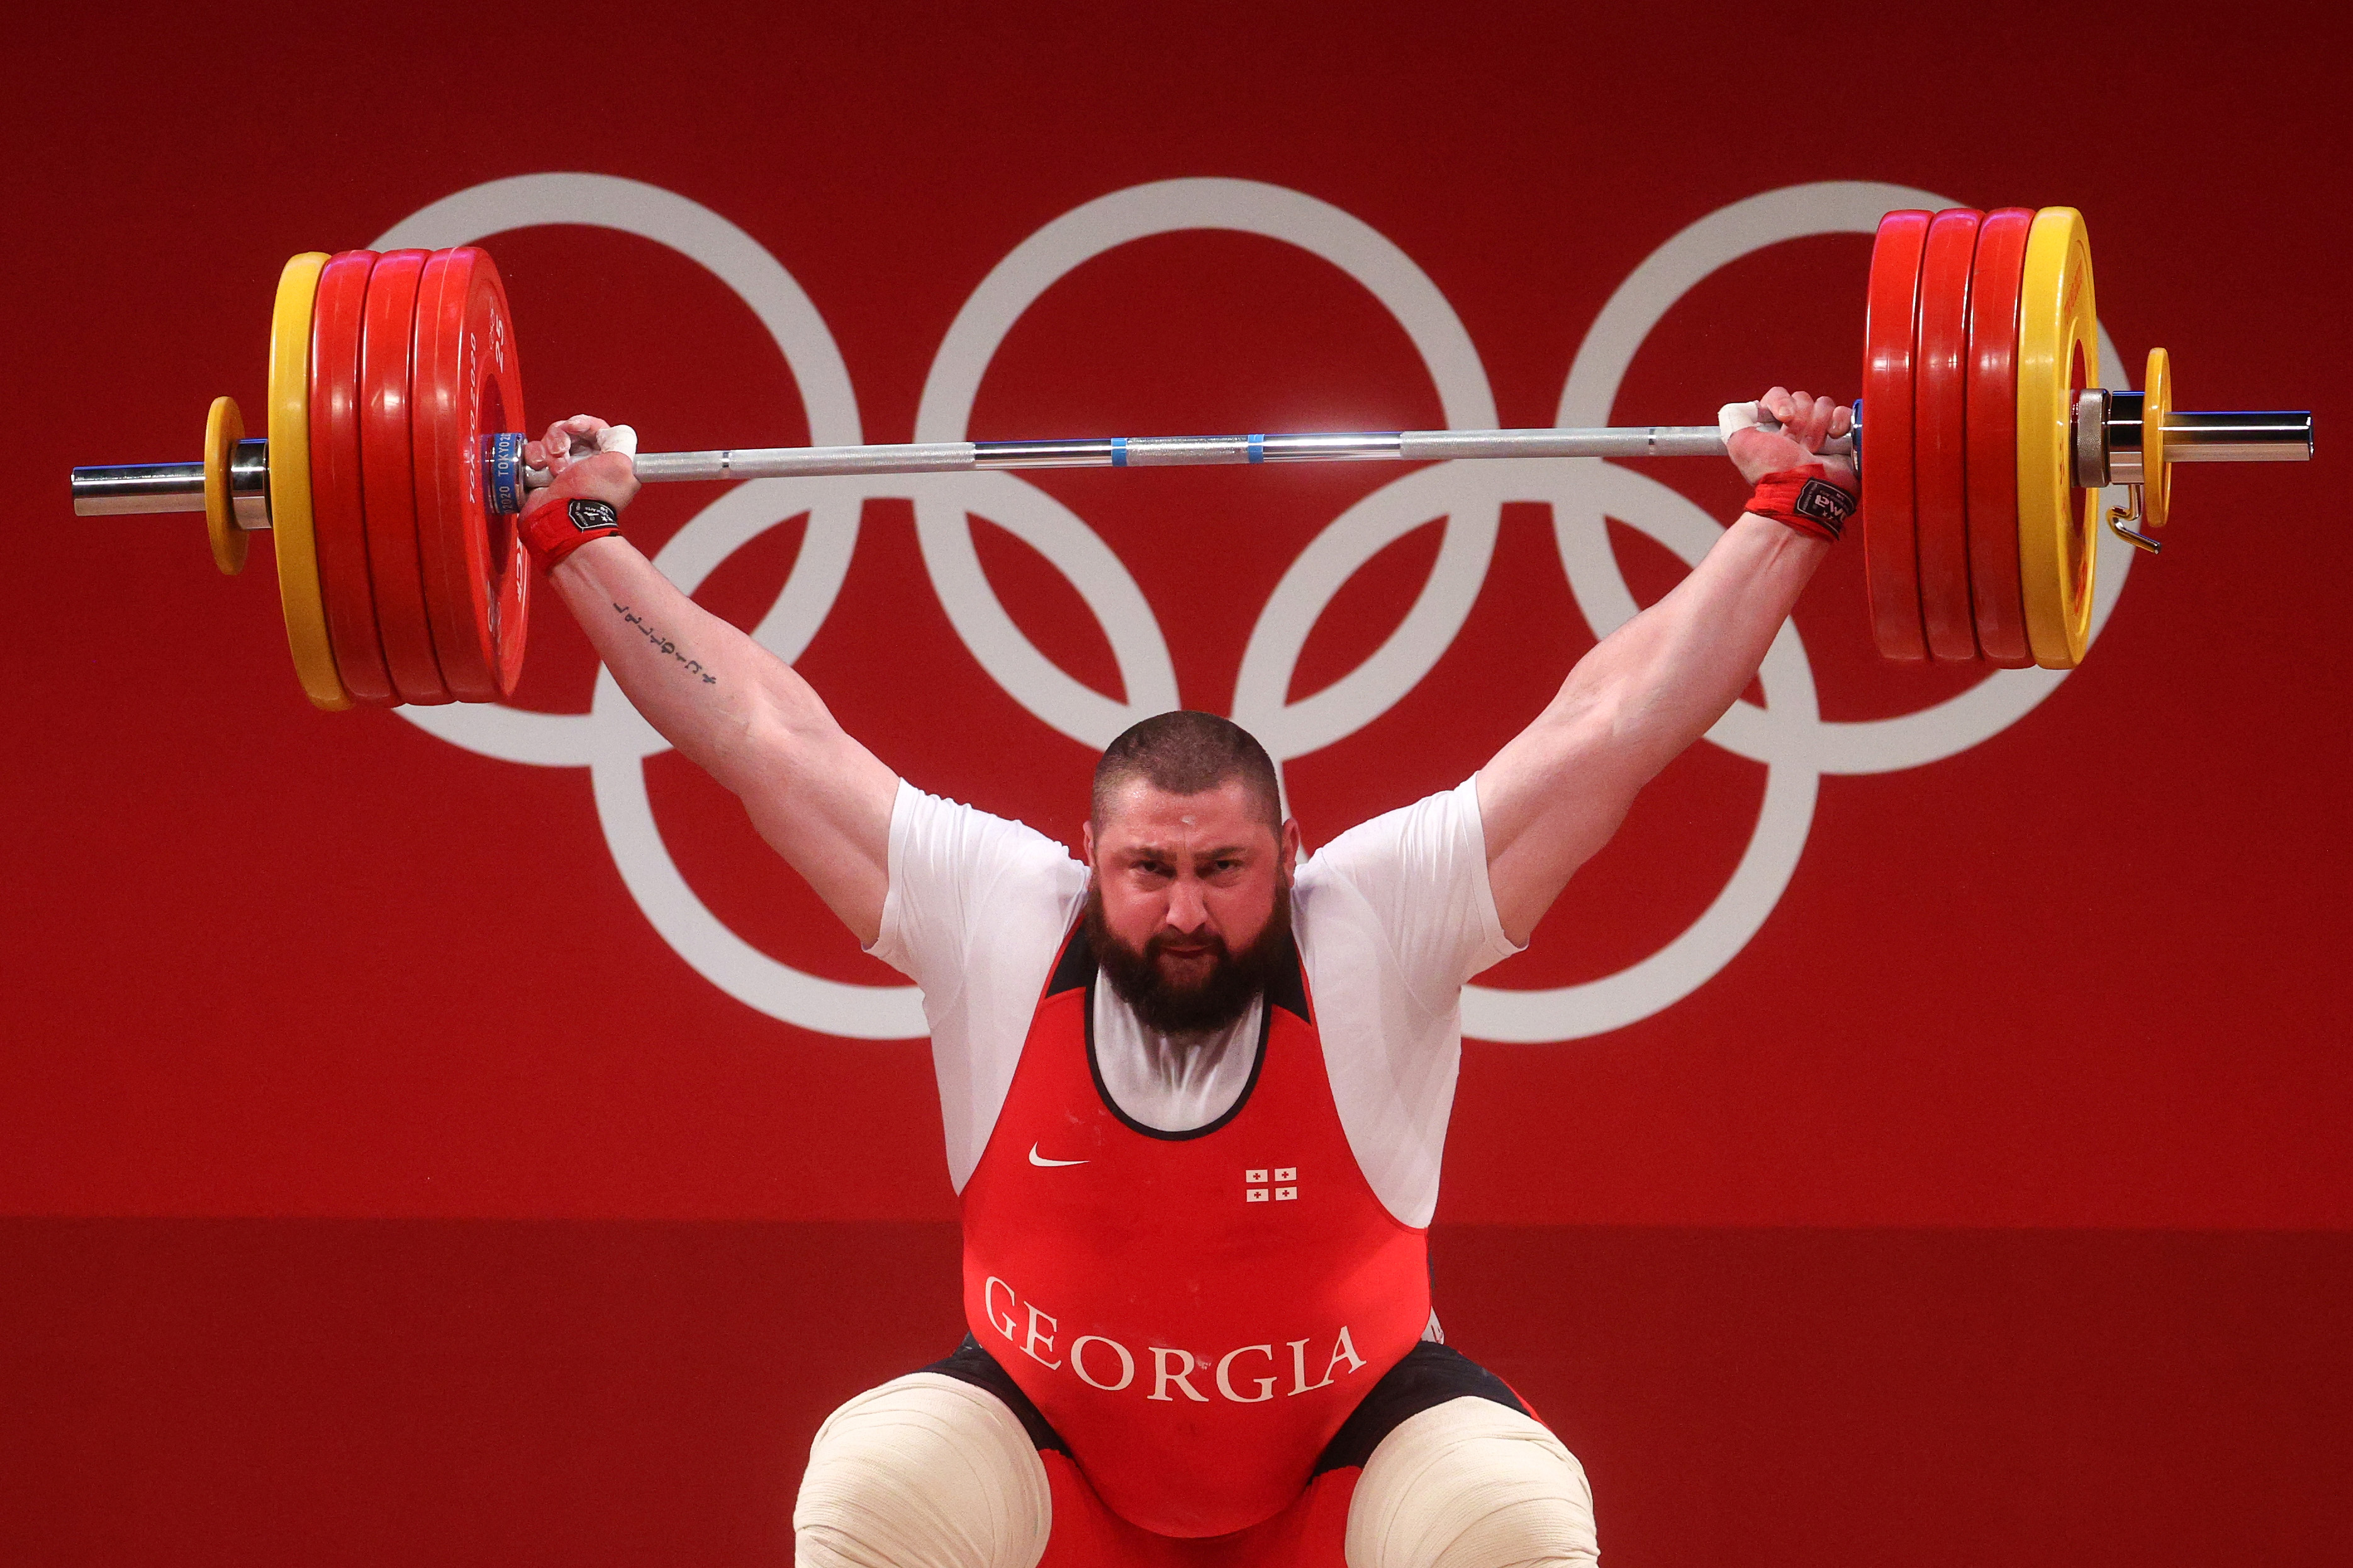 Georgian weightlifter breaks world records to win gold at Olympics -  National